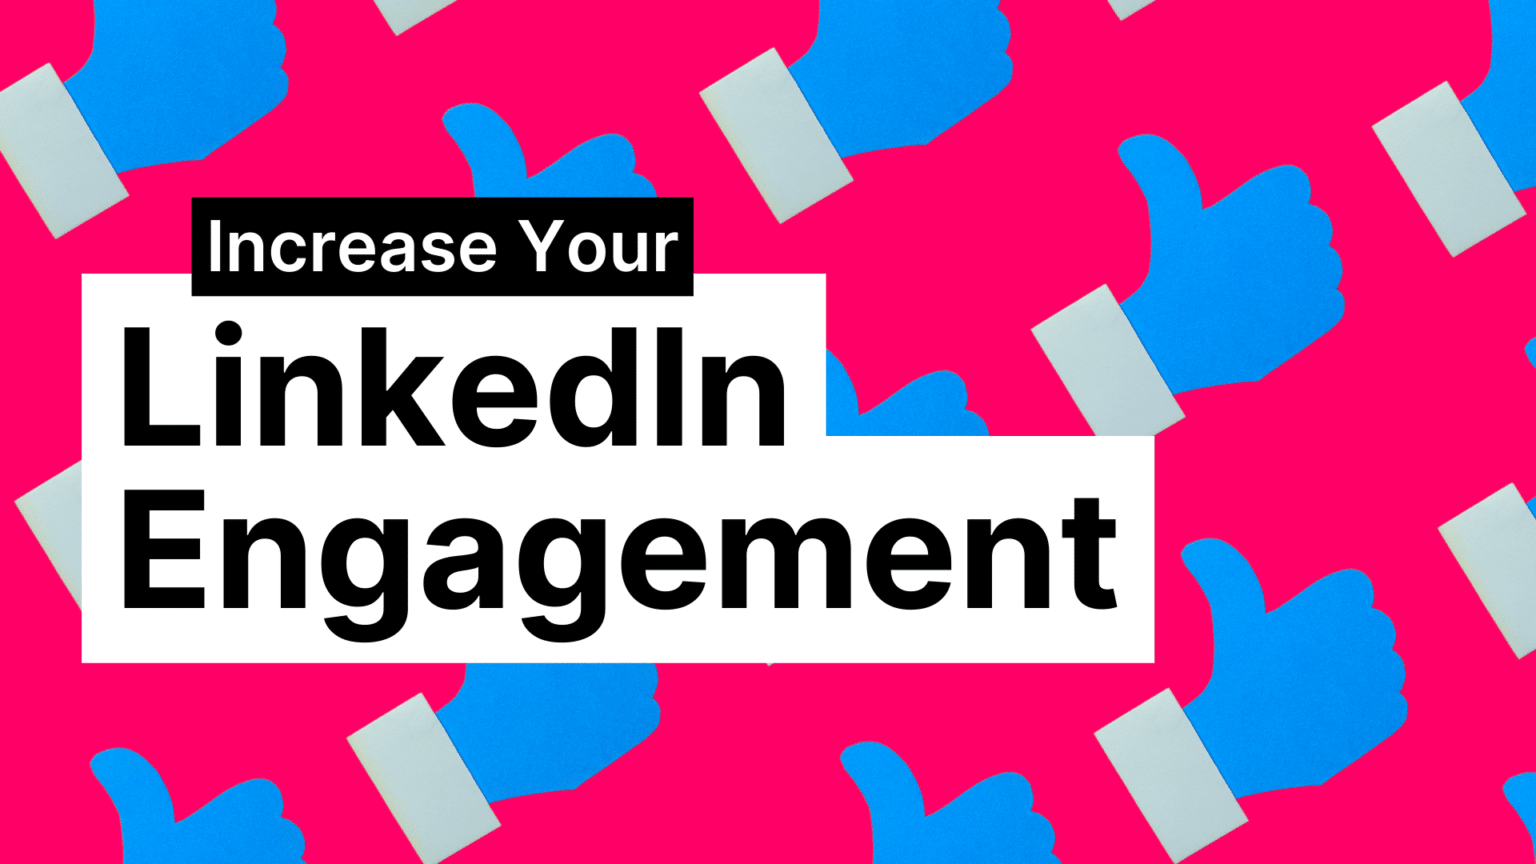 How to increase your LinkedIn engagement featured image